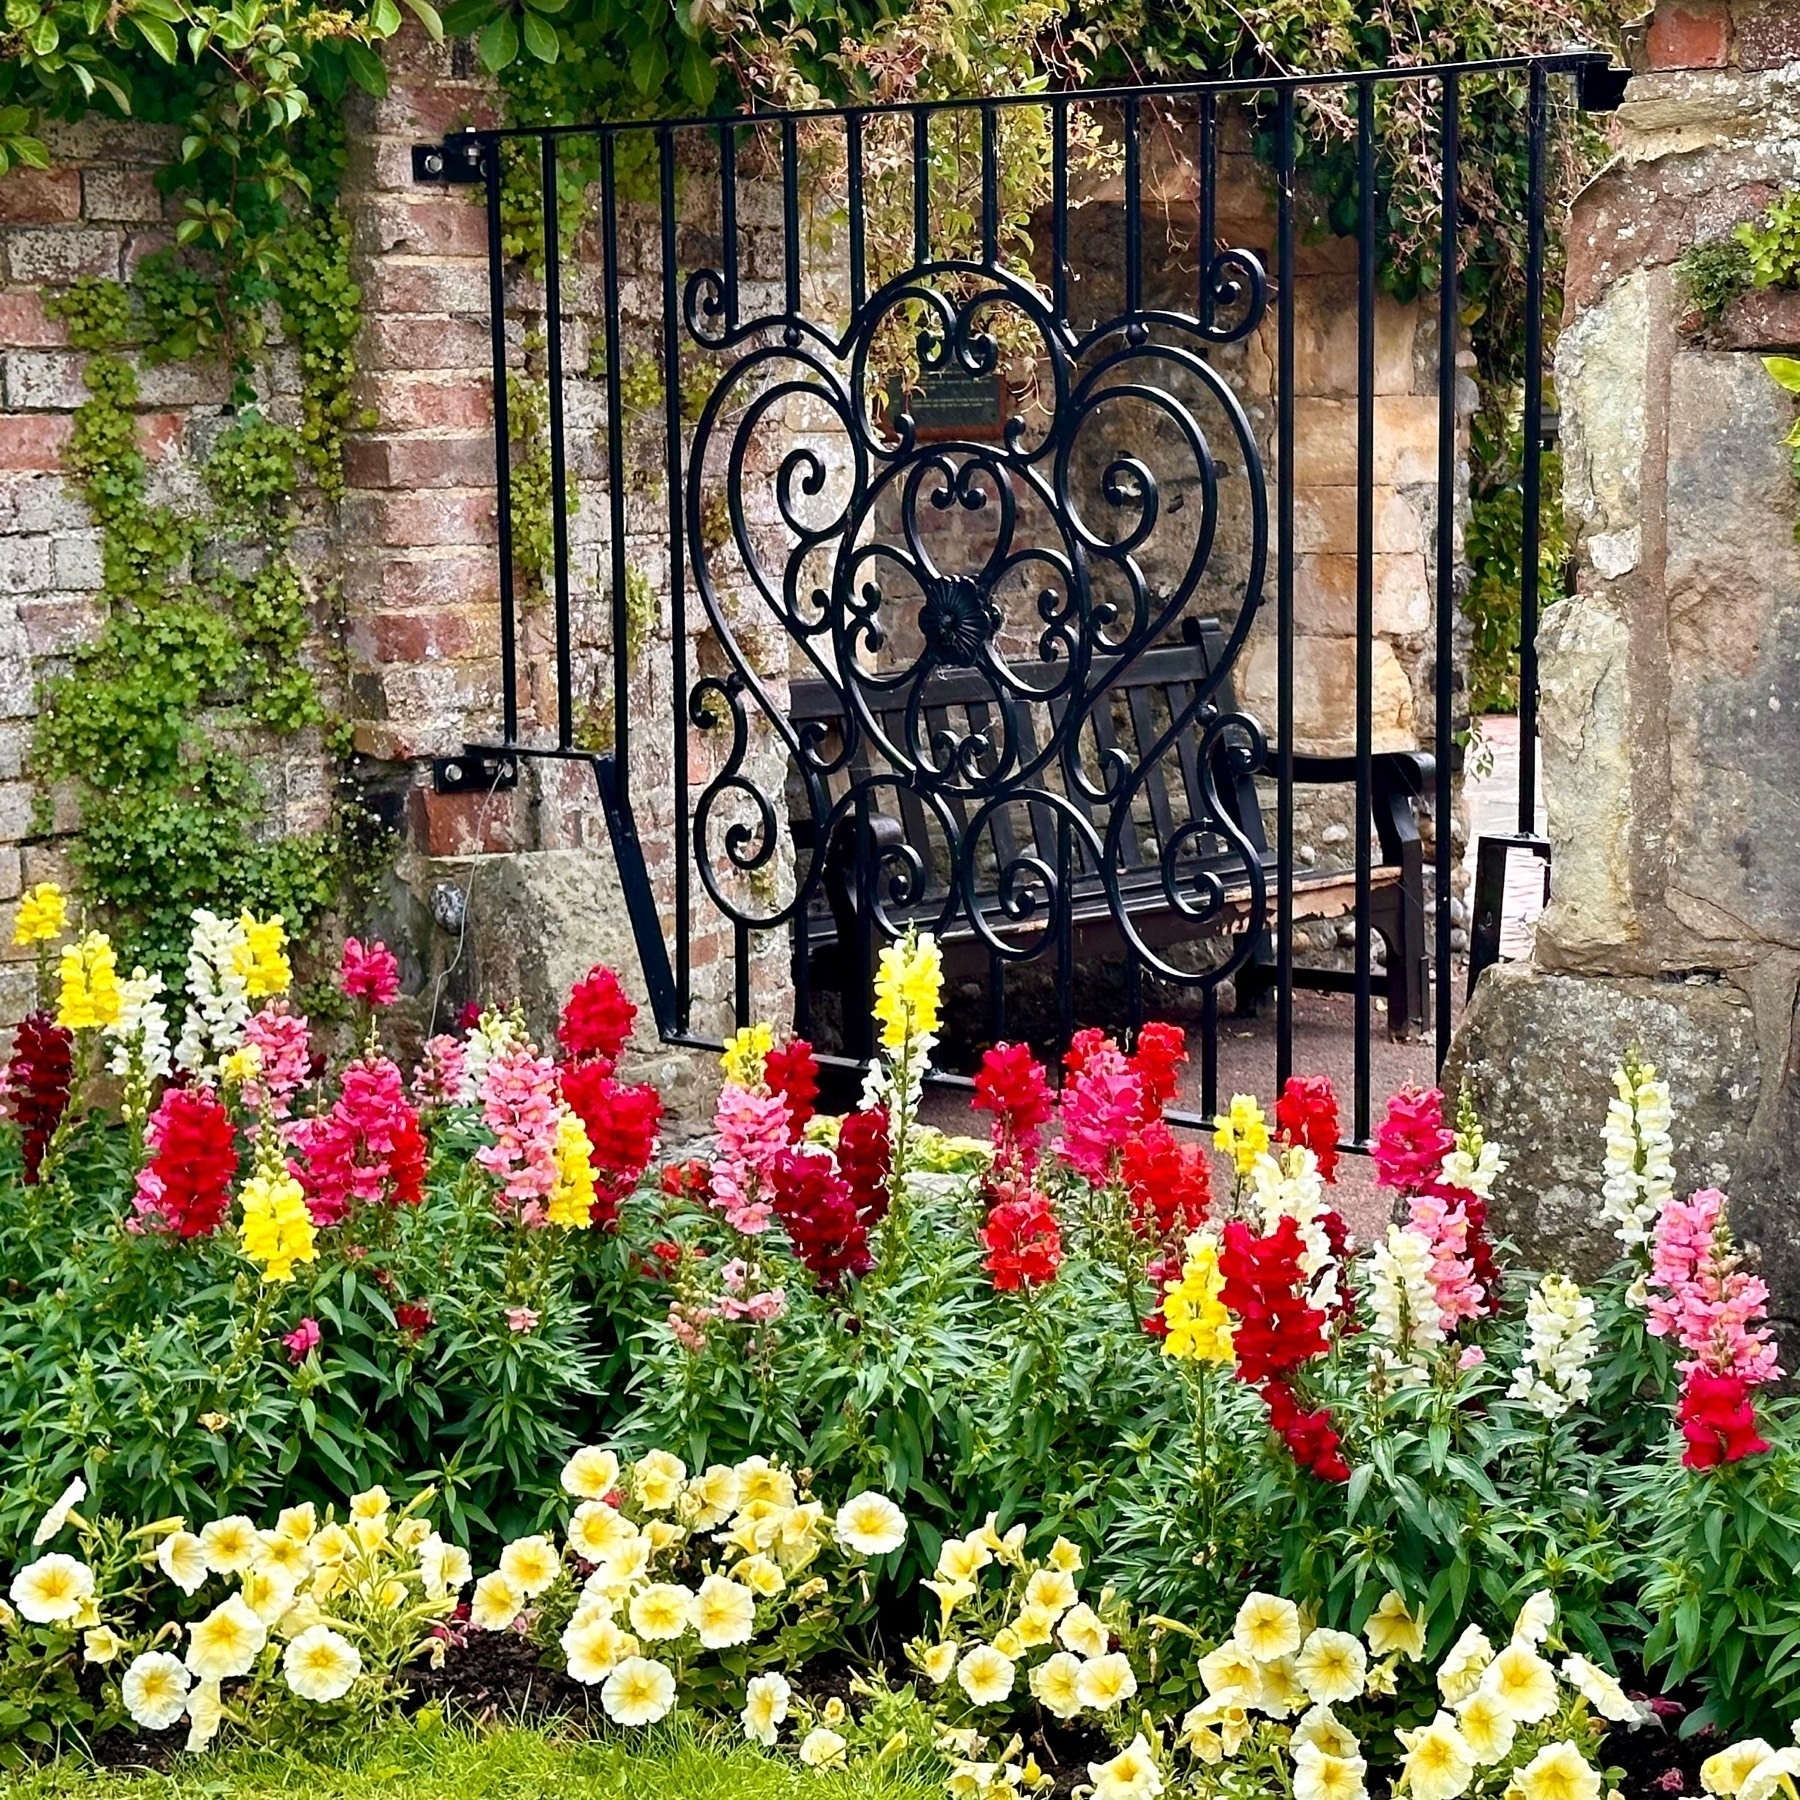 Coloured flower garden in front of cast iron gate, with cast iron bench beyond